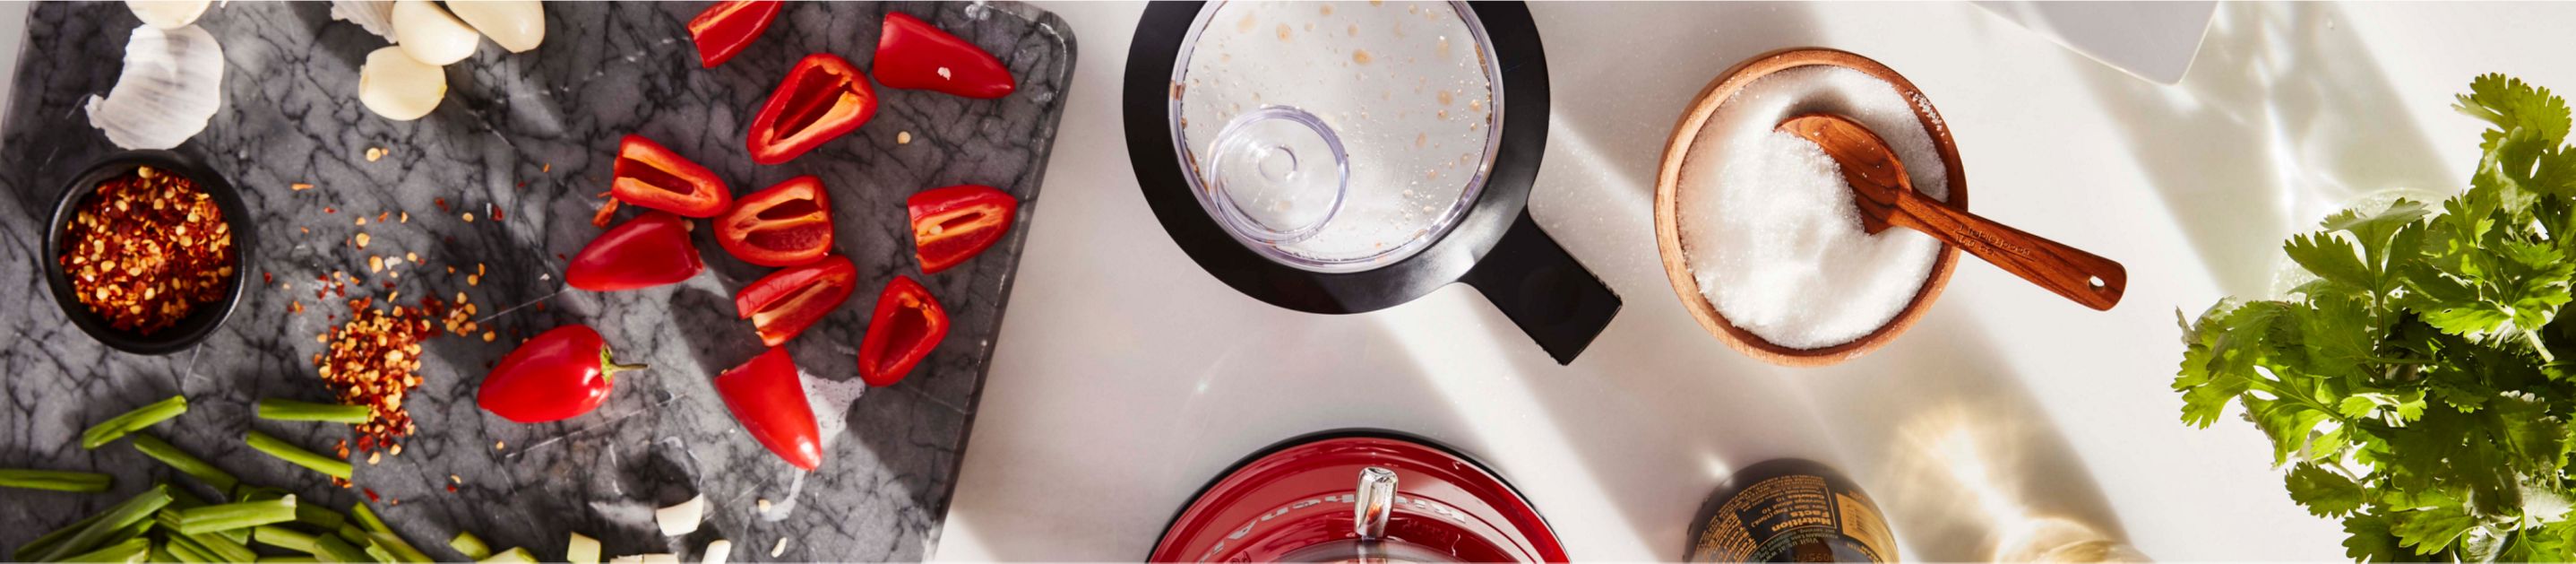 Shop KitchenAid Special Offers.